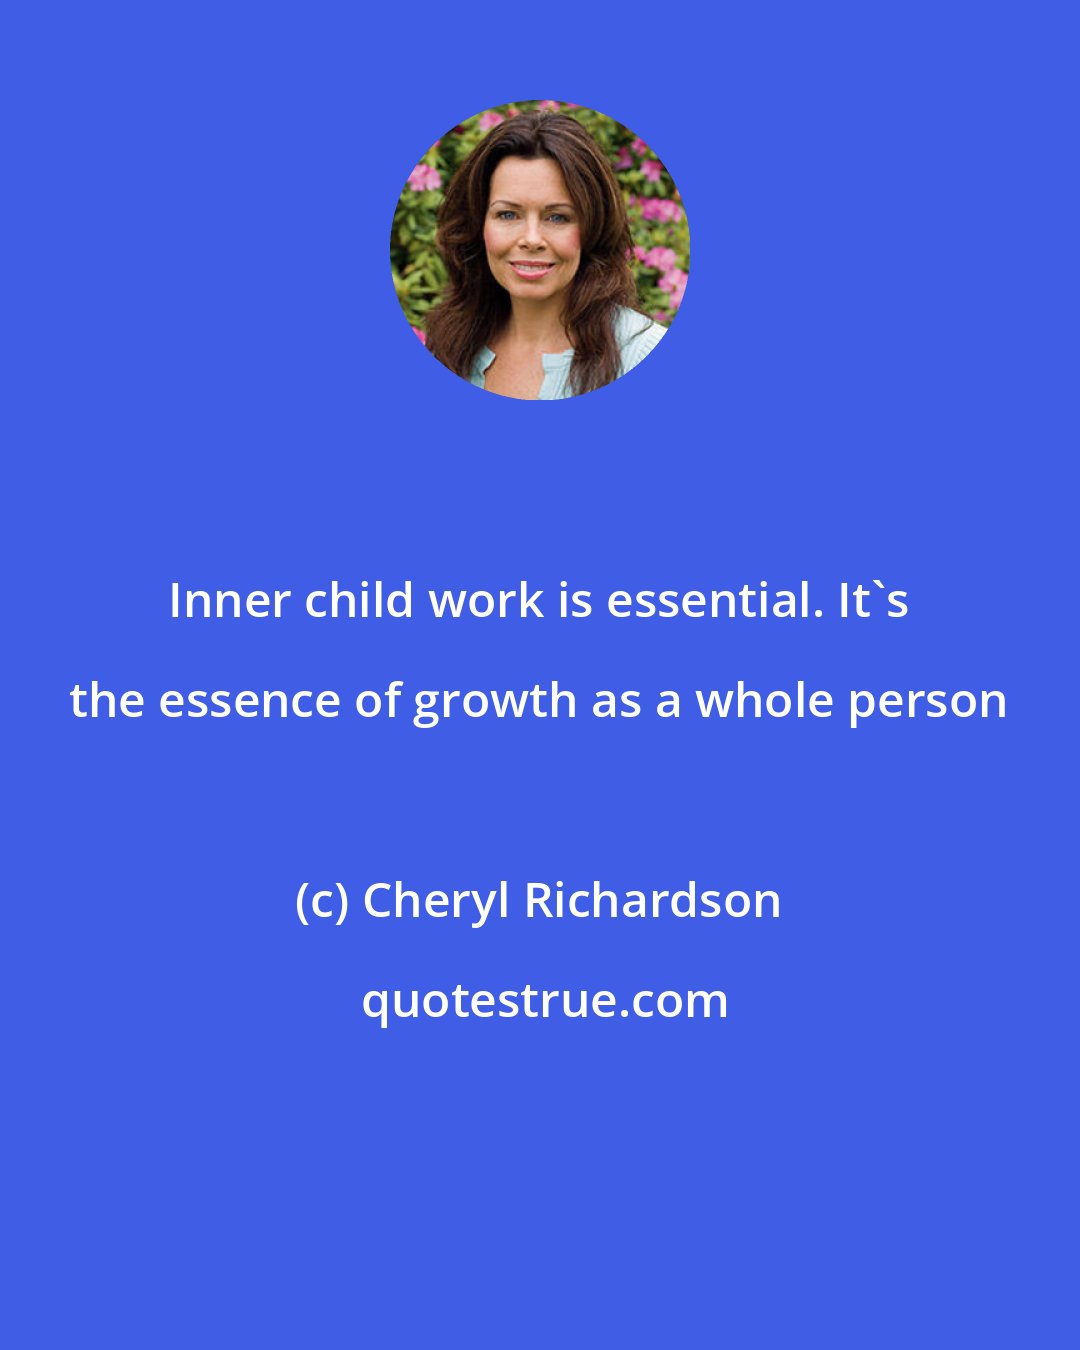 Cheryl Richardson: Inner child work is essential. It's the essence of growth as a whole person